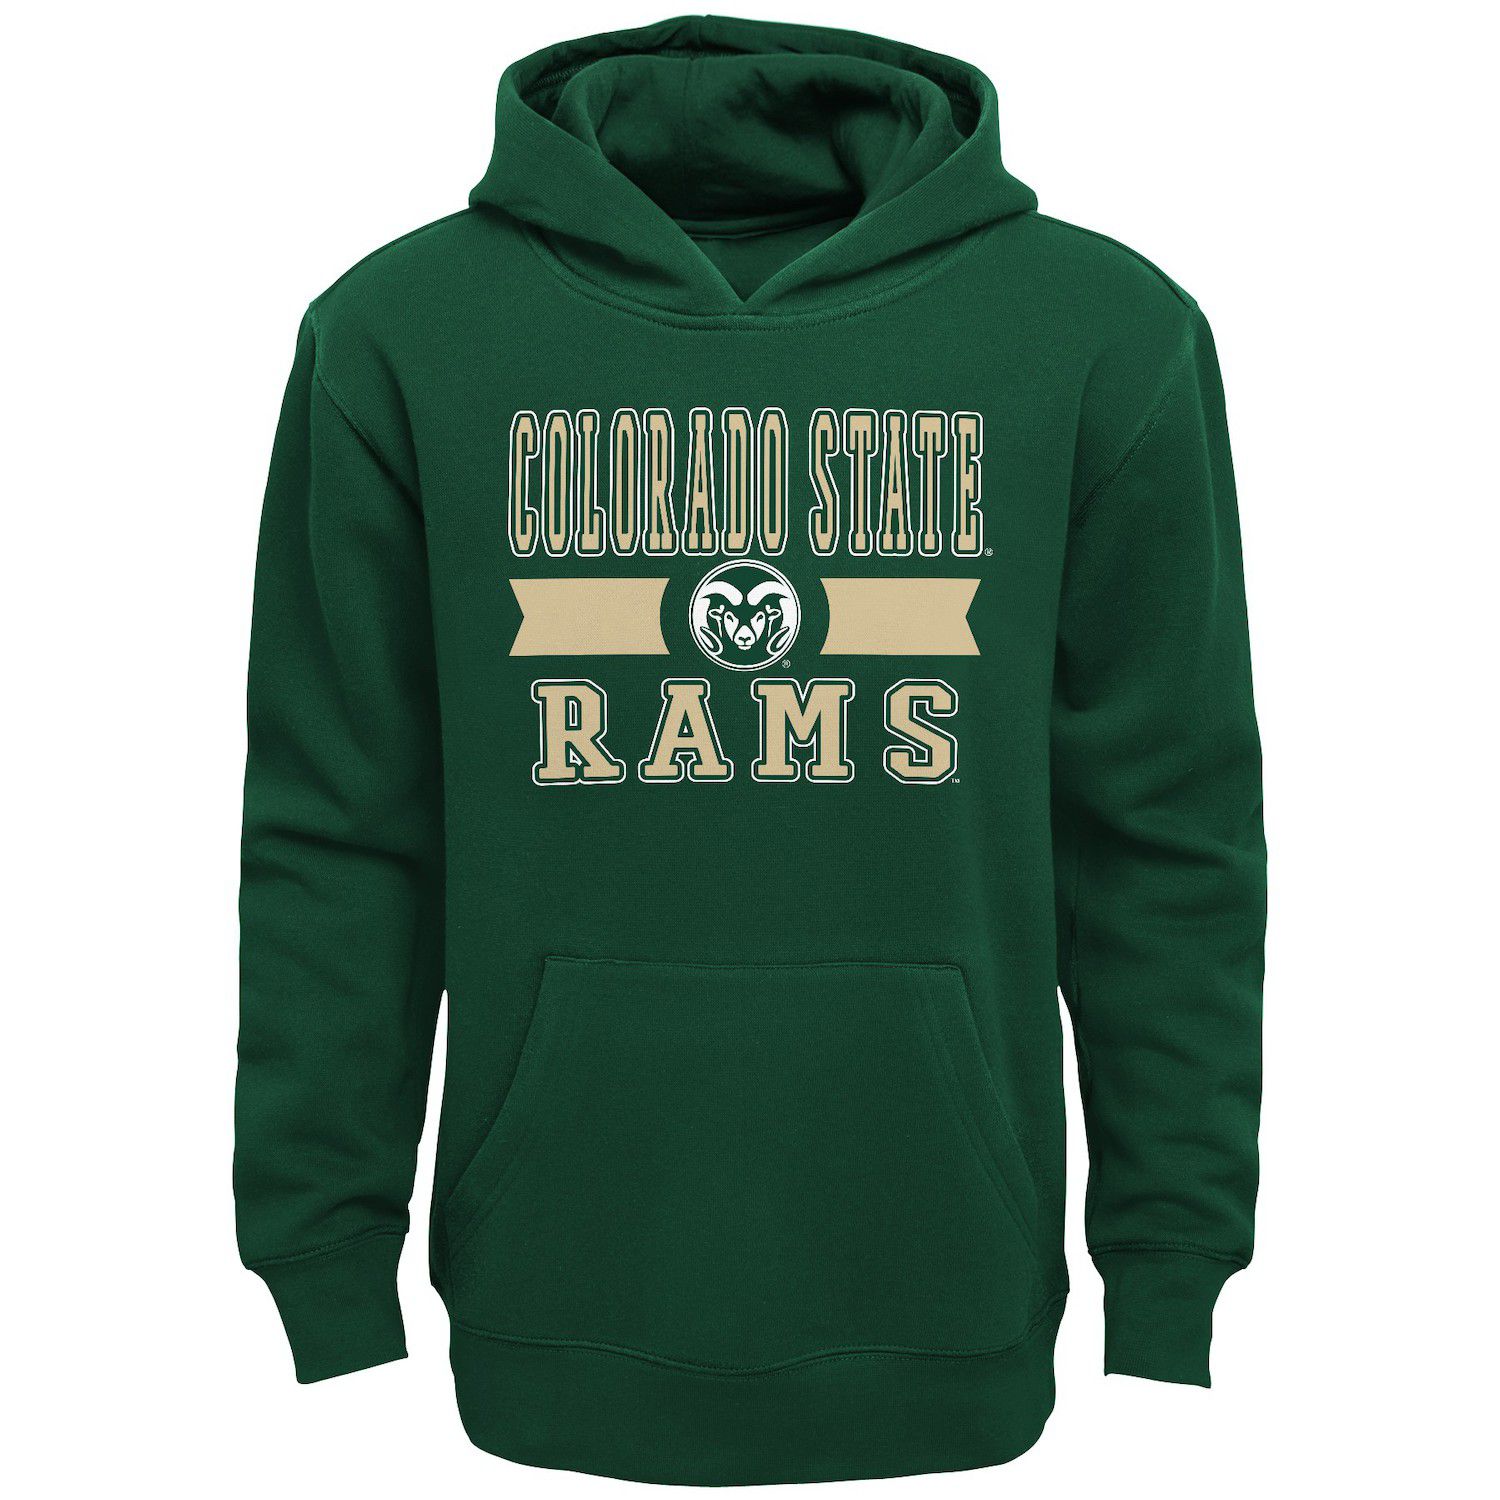 Image for Unbranded Boys 4-7 Colorado State Rams Behold Pride Hoodie at Kohl's.